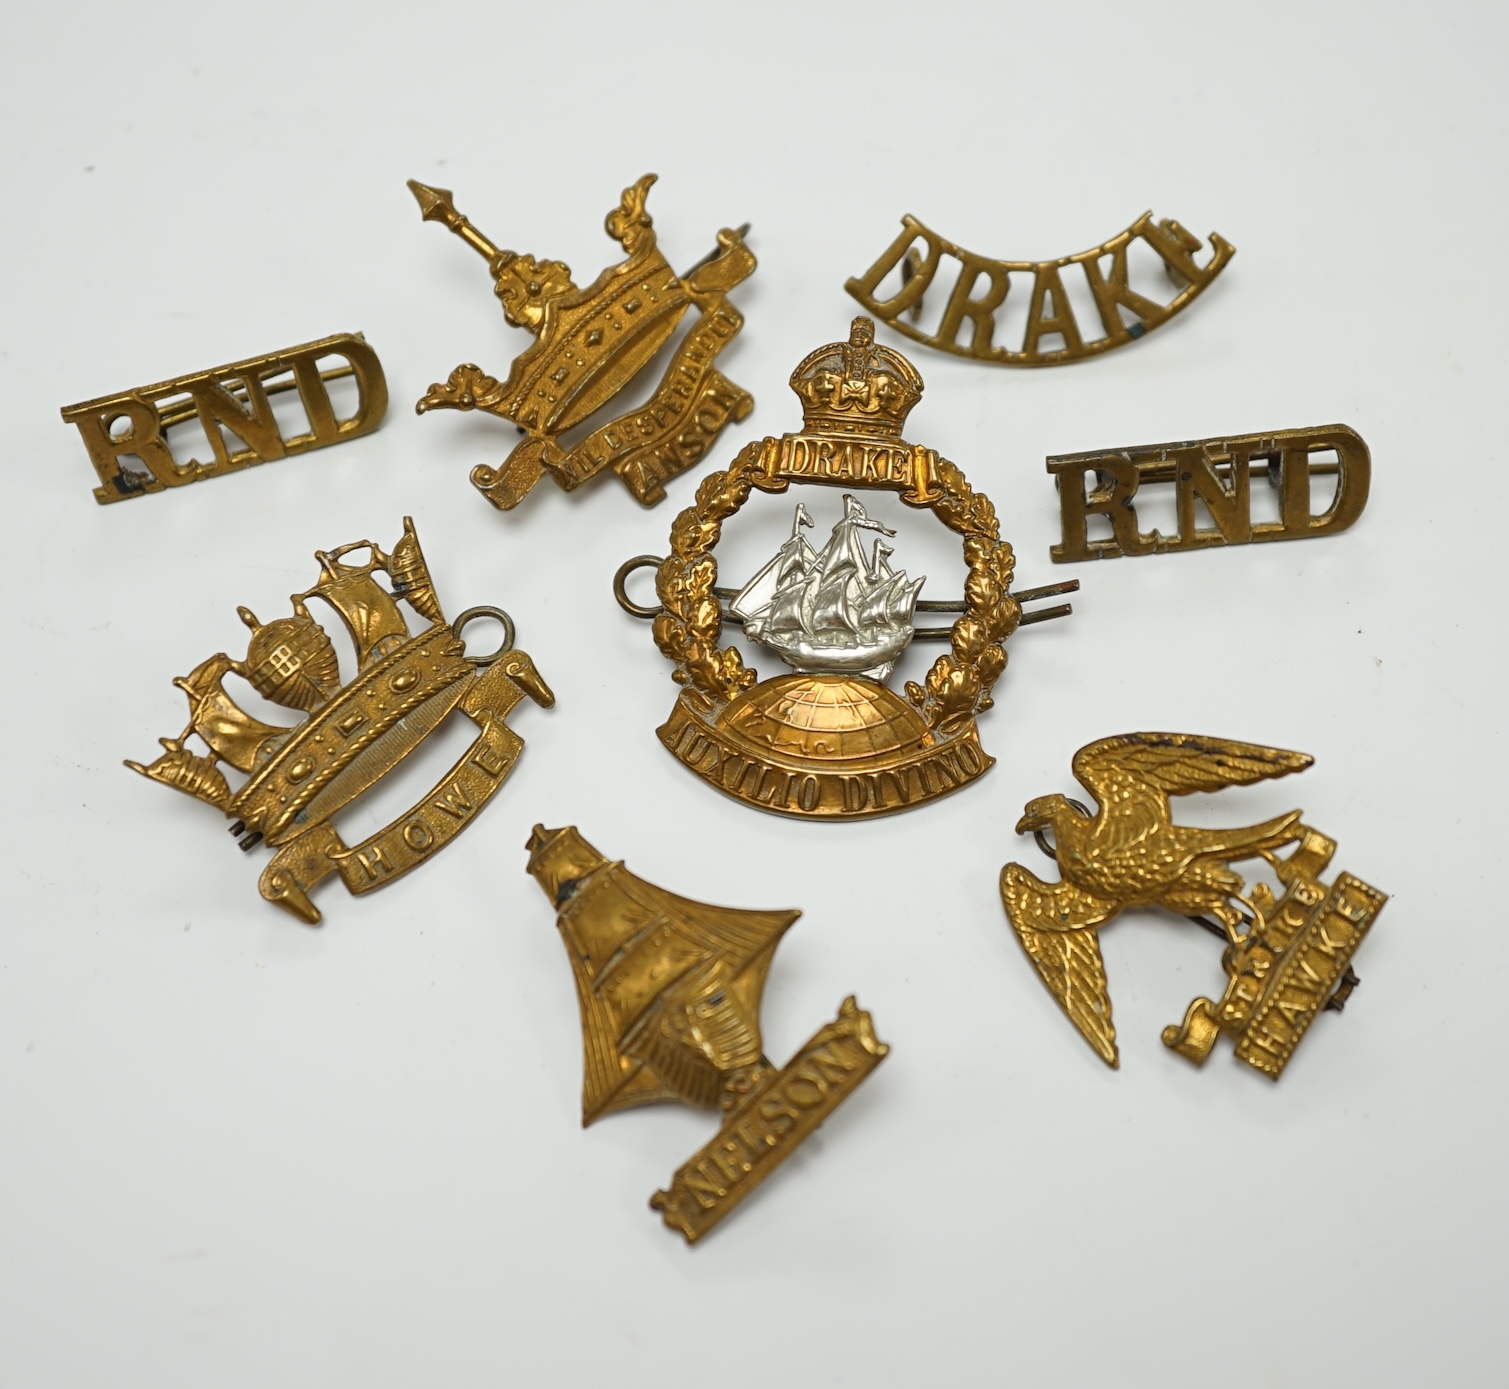 Five Royal Navy First World War brass cap badges; the Nelson, Hawke, Anson and Howe Battalions, together with three shoulder titles. Condition - fair, some possible restrikes.